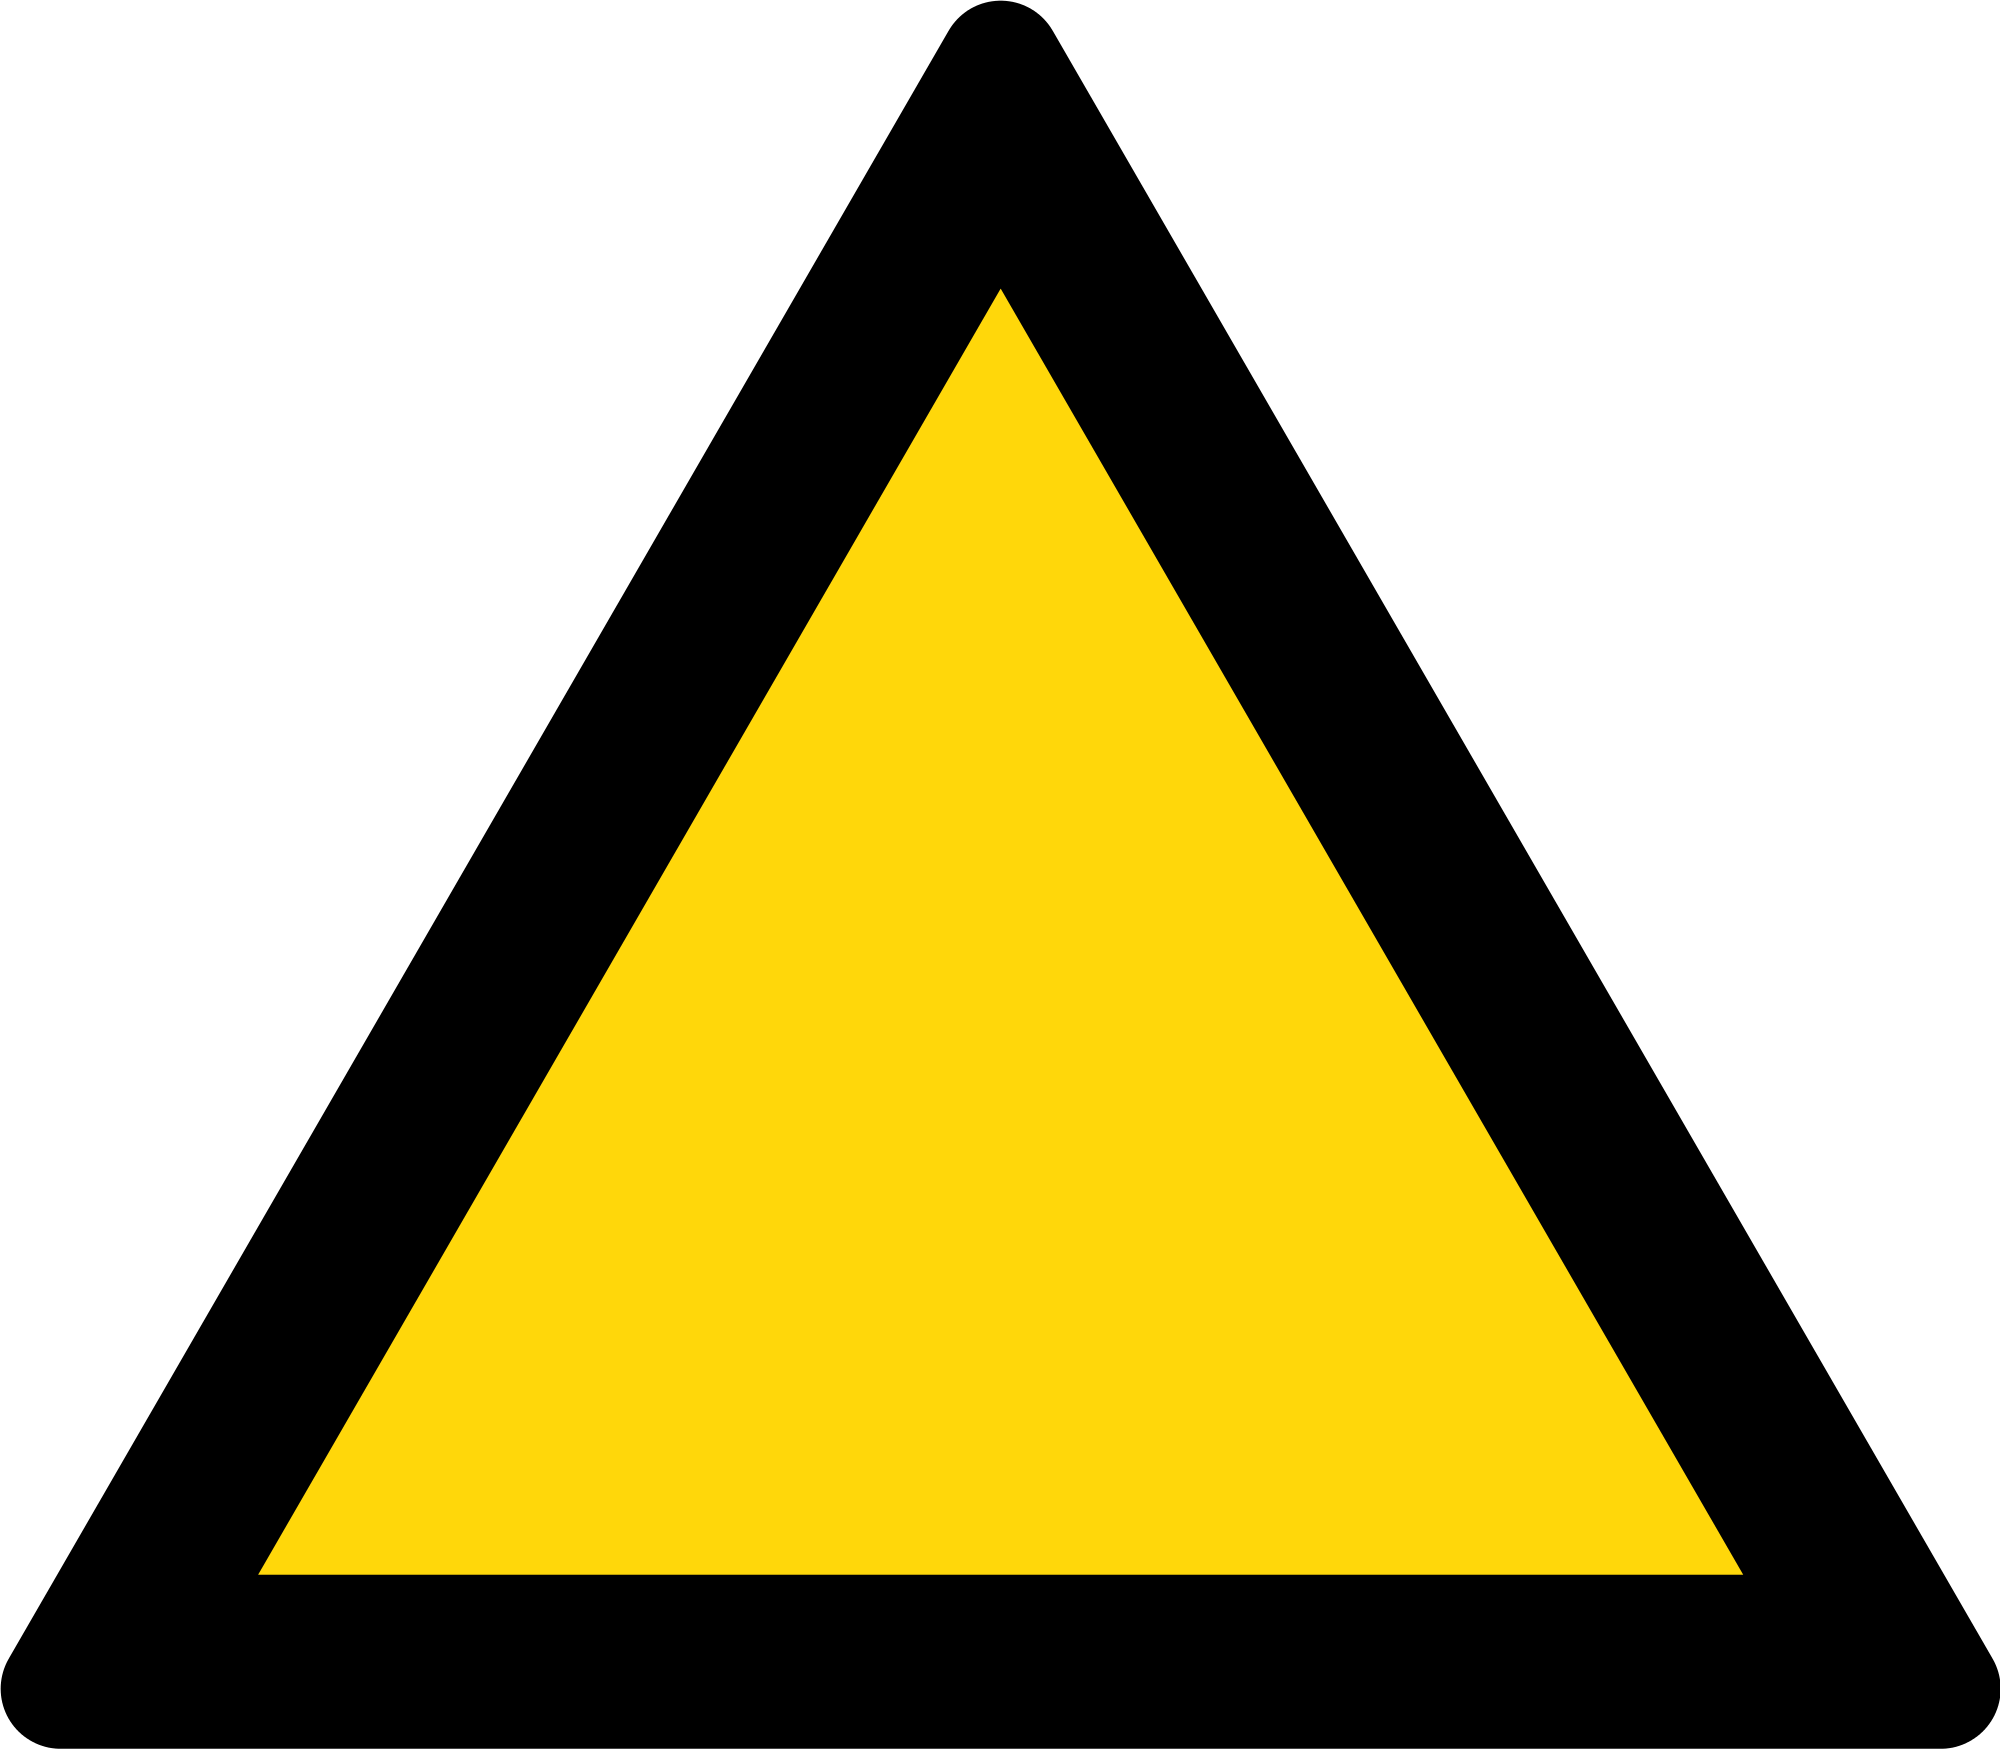 Black Yellow Triangle Logo - File:Triangle warning sign (black and yellow).svg - Wikimedia Commons